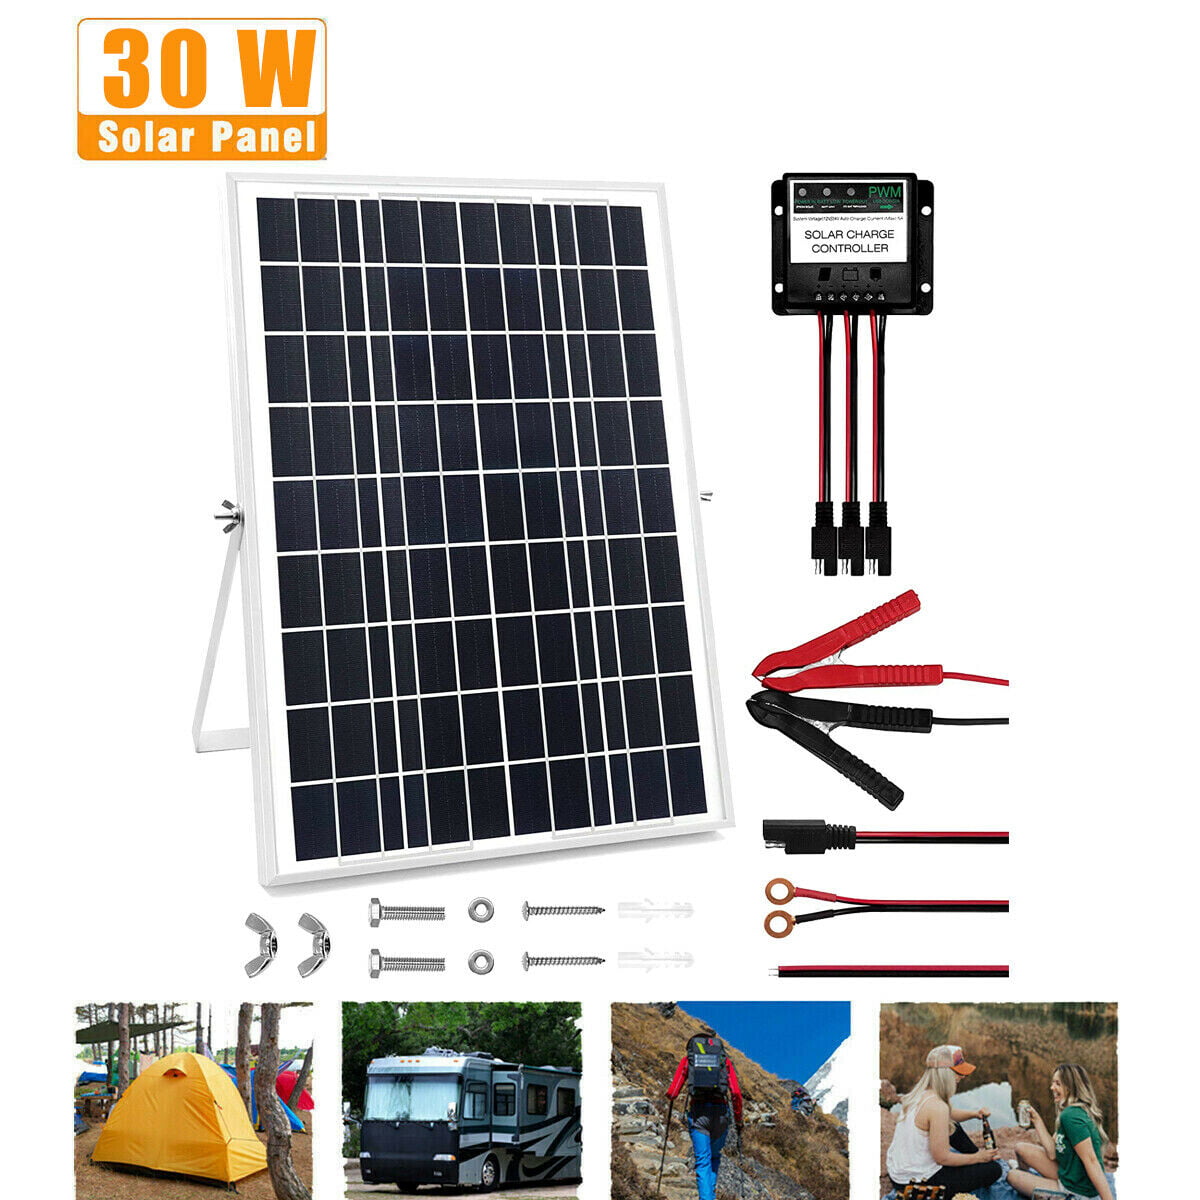 Suitable for Automotive,RV Gate Opener Boat,12V Deep Cycle Battery,ATV Renogy 30W Monocrystalline Solar Panel 5A Charge Controller SAE Connection Cable Kits Marine 